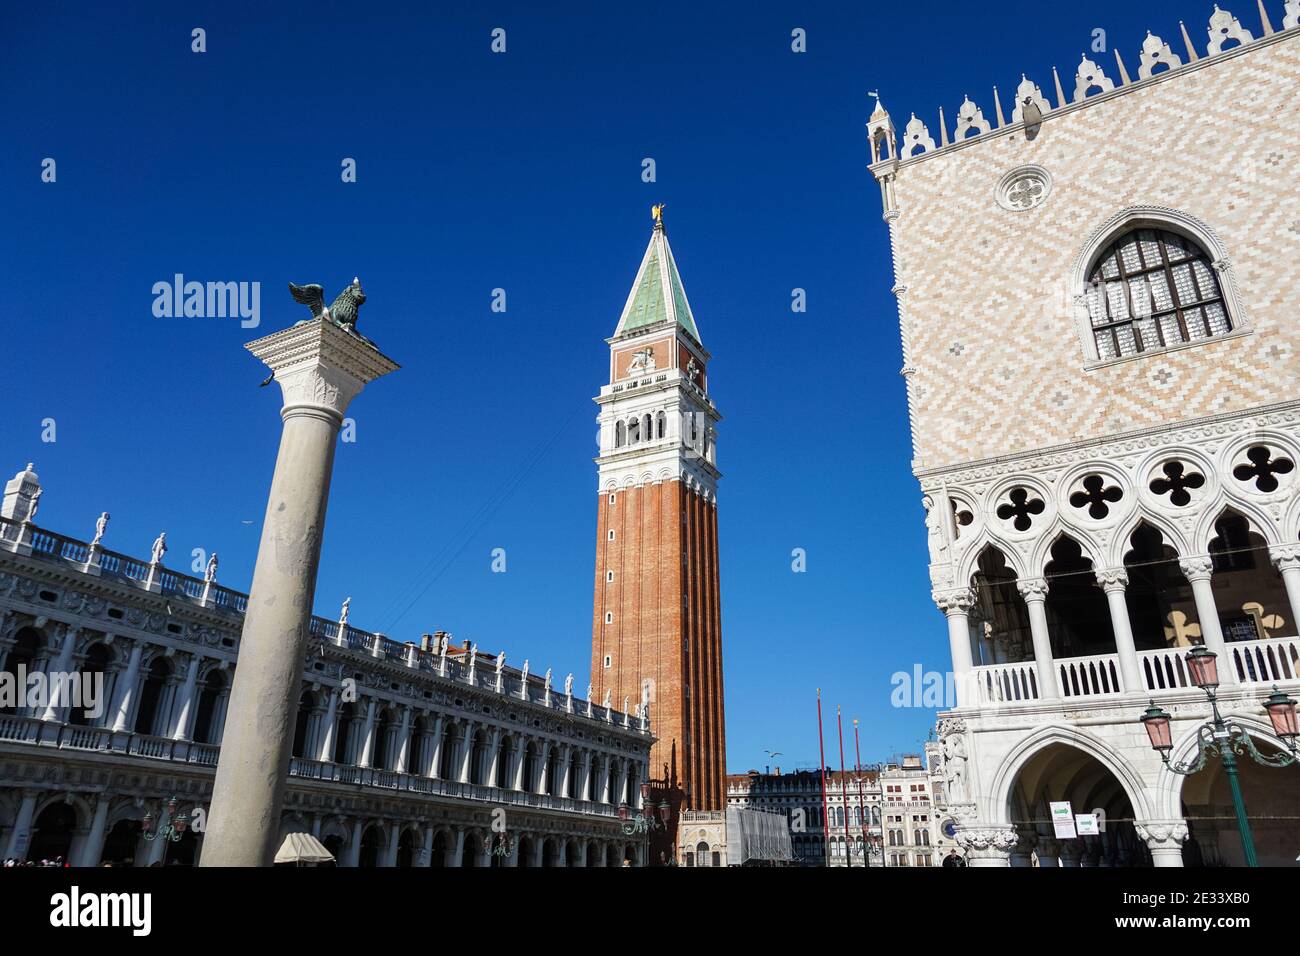 Piazza San Marco with St Mark's Campanile, the bell tower of St Mark's Basilica, the Doge's Palace and Column of San Marco in Venice, Italy Stock Photo